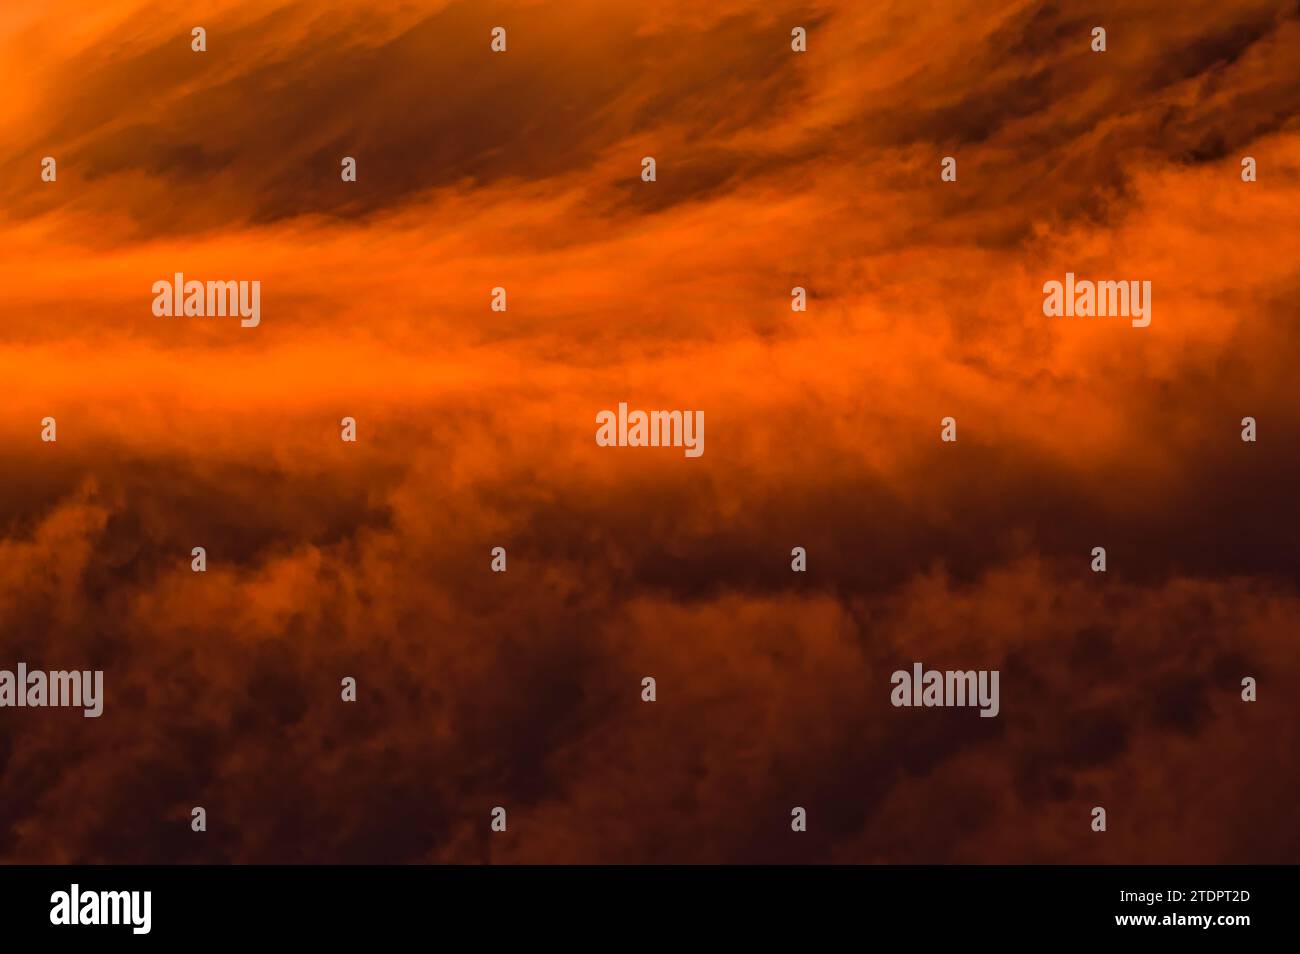 Very dramatic sunset clouds on the sky. Copy space for placement of text. Empty background teplate for designers. Stock Photo